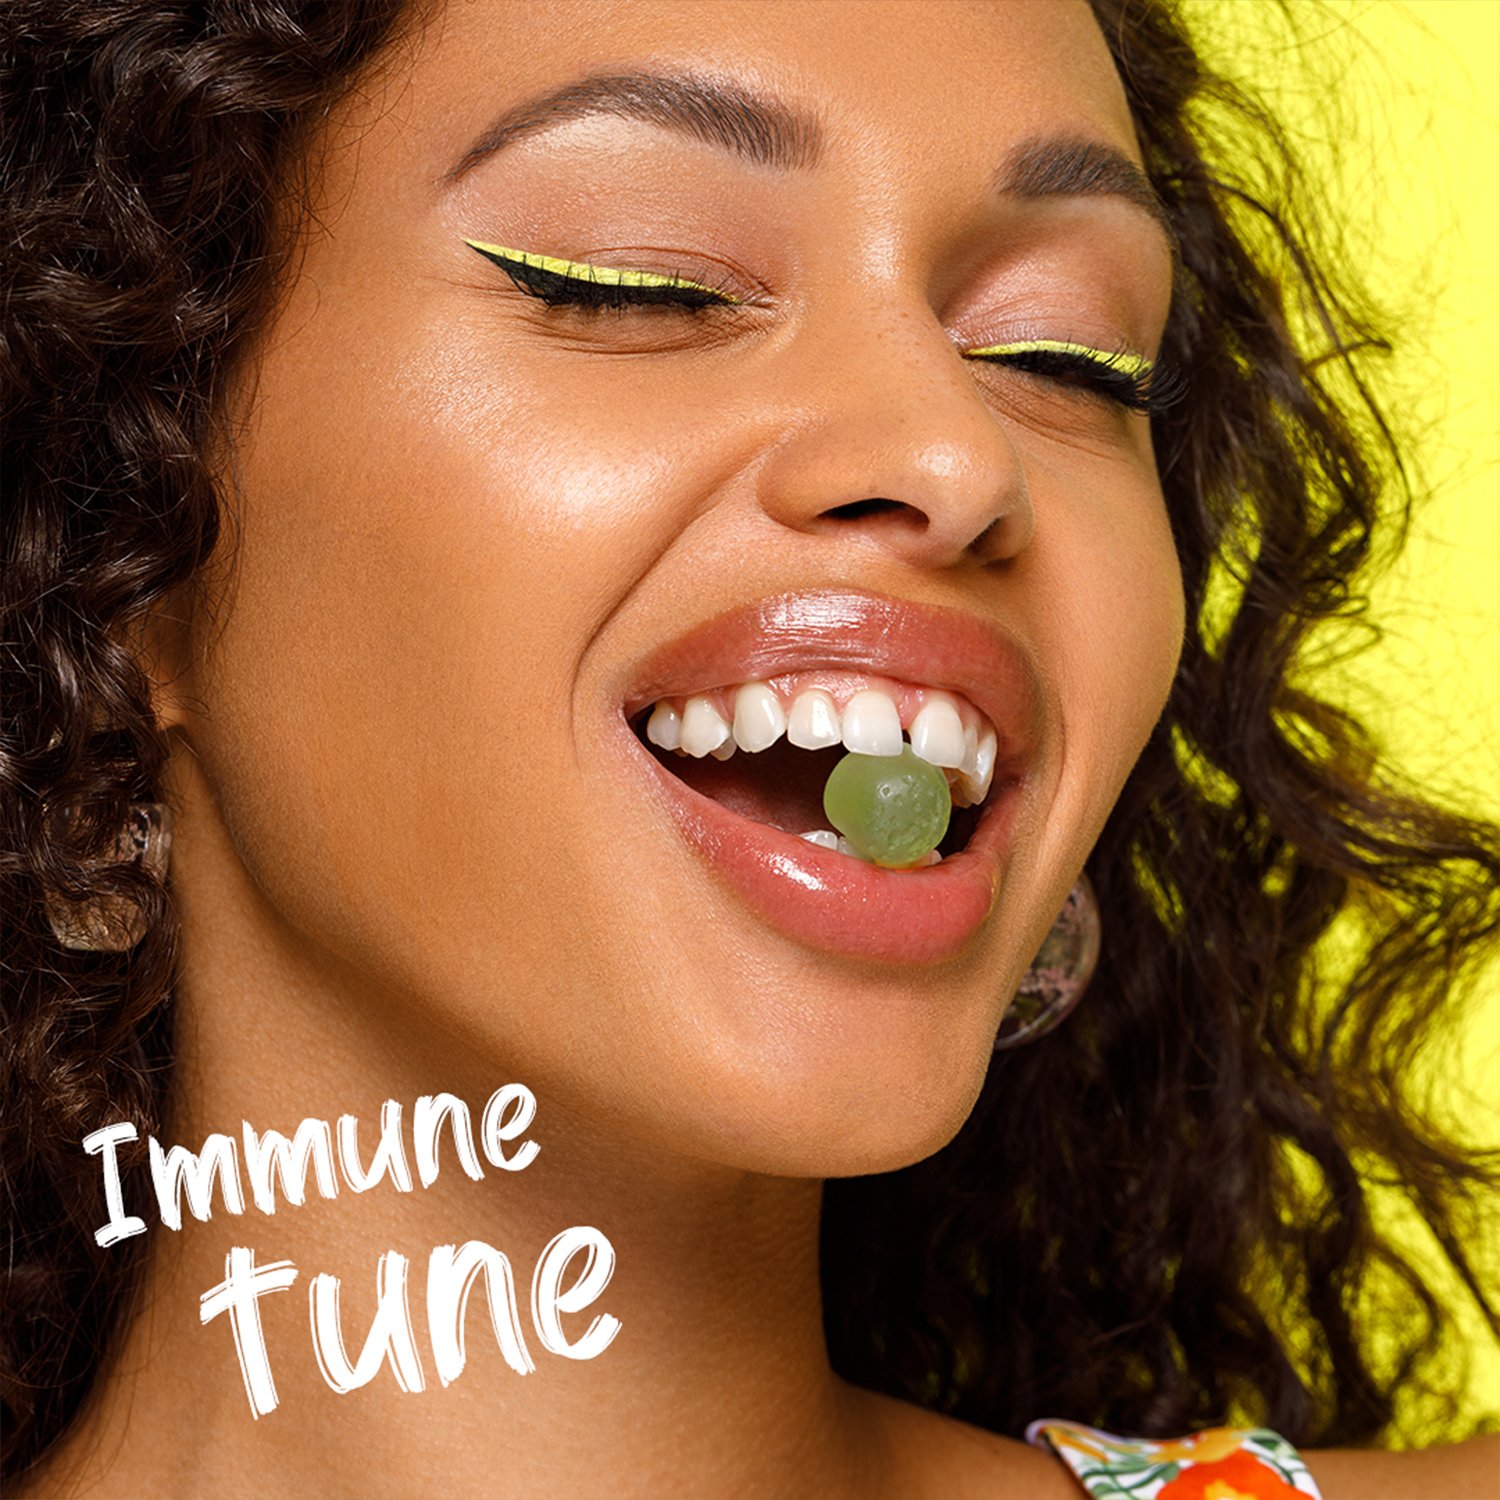 INAO Inner & Outer Beauty by essence Immune Tune 60 tuggtabletter